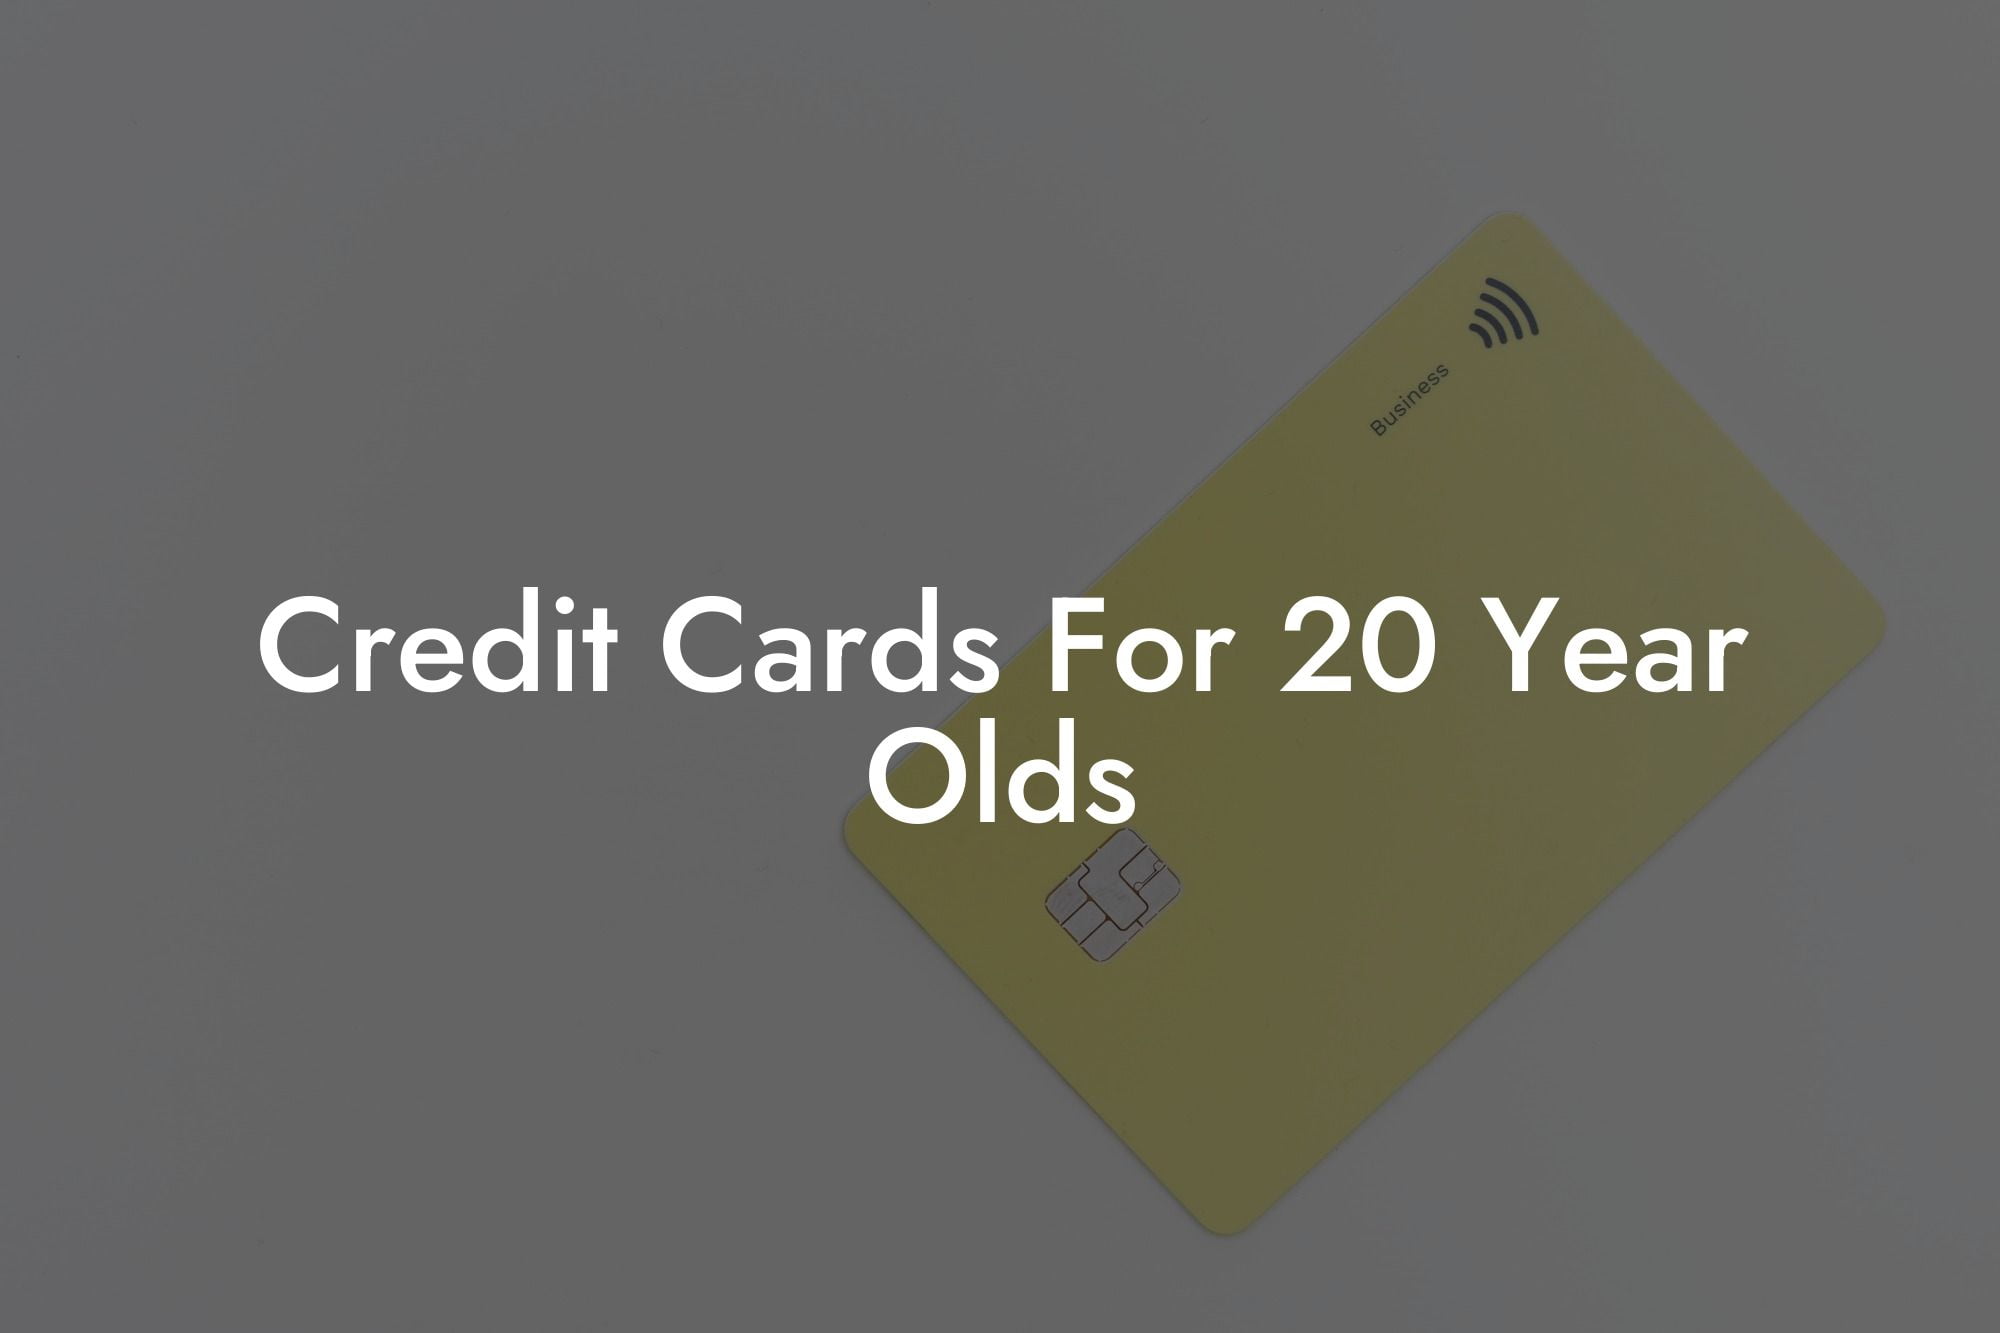 Credit Cards For 20 Year Olds